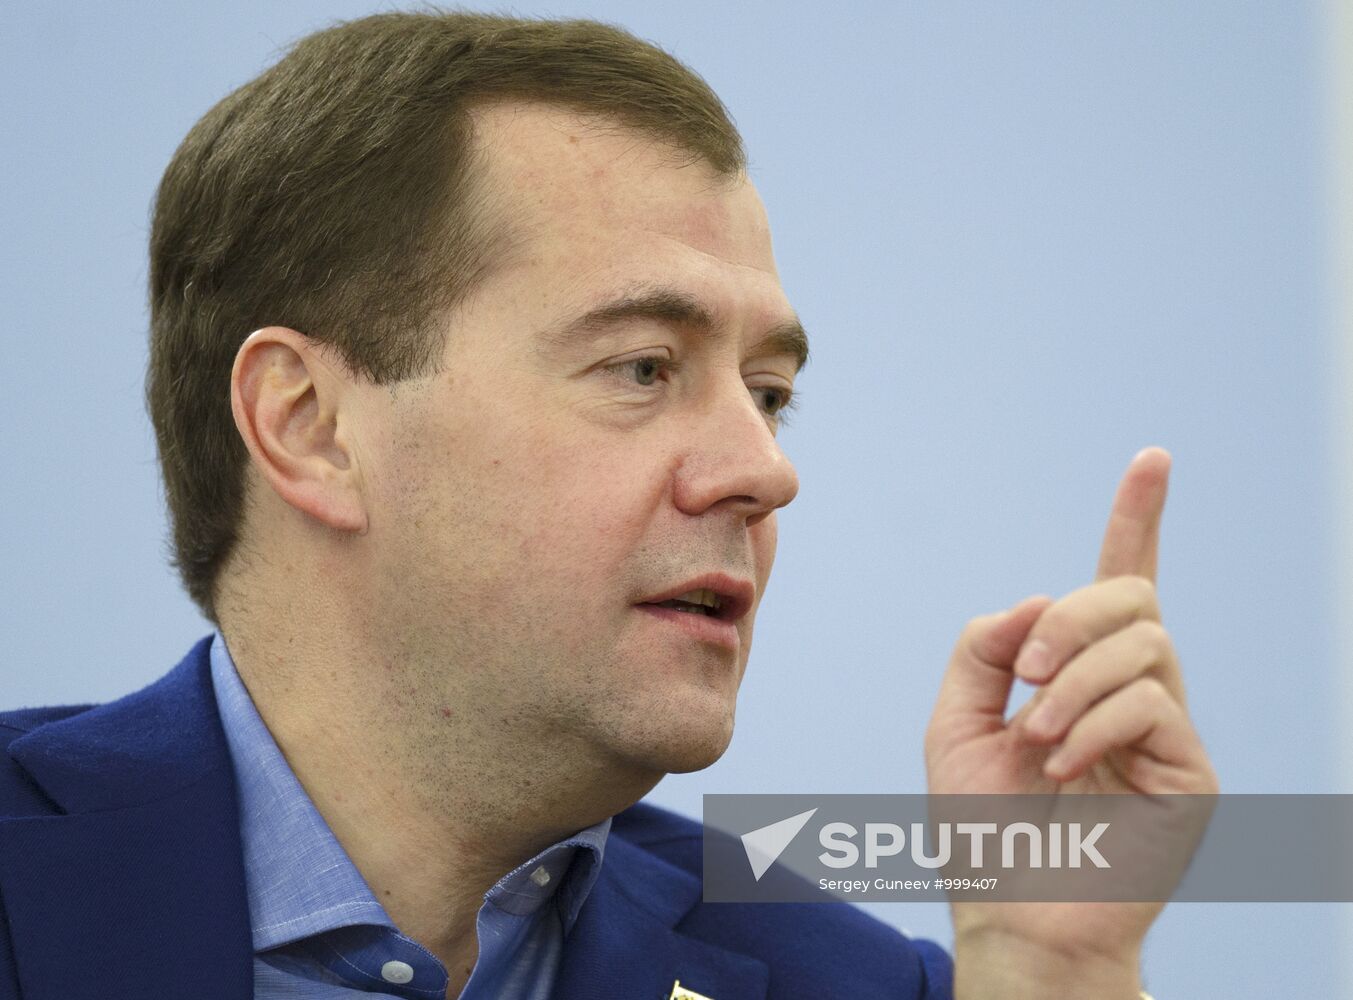 Dmitry Medvedev meets with supporters